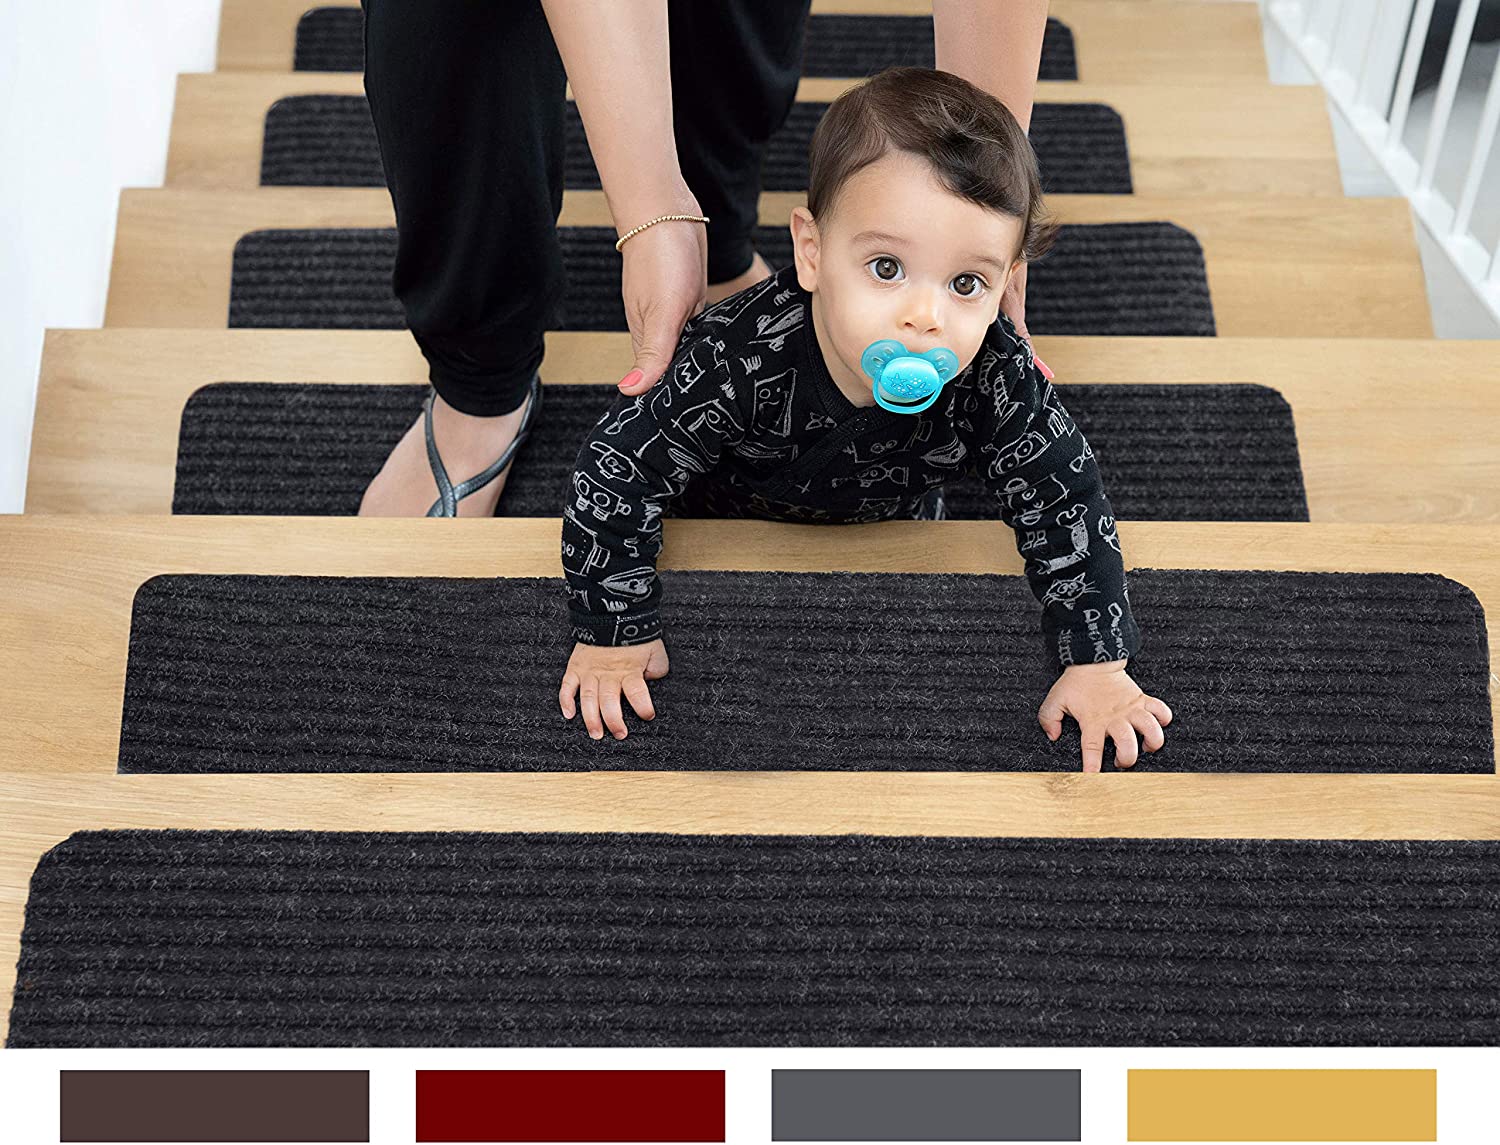 Top 3 Best Carpet Pads For Stairs [Reviewed in 2020]